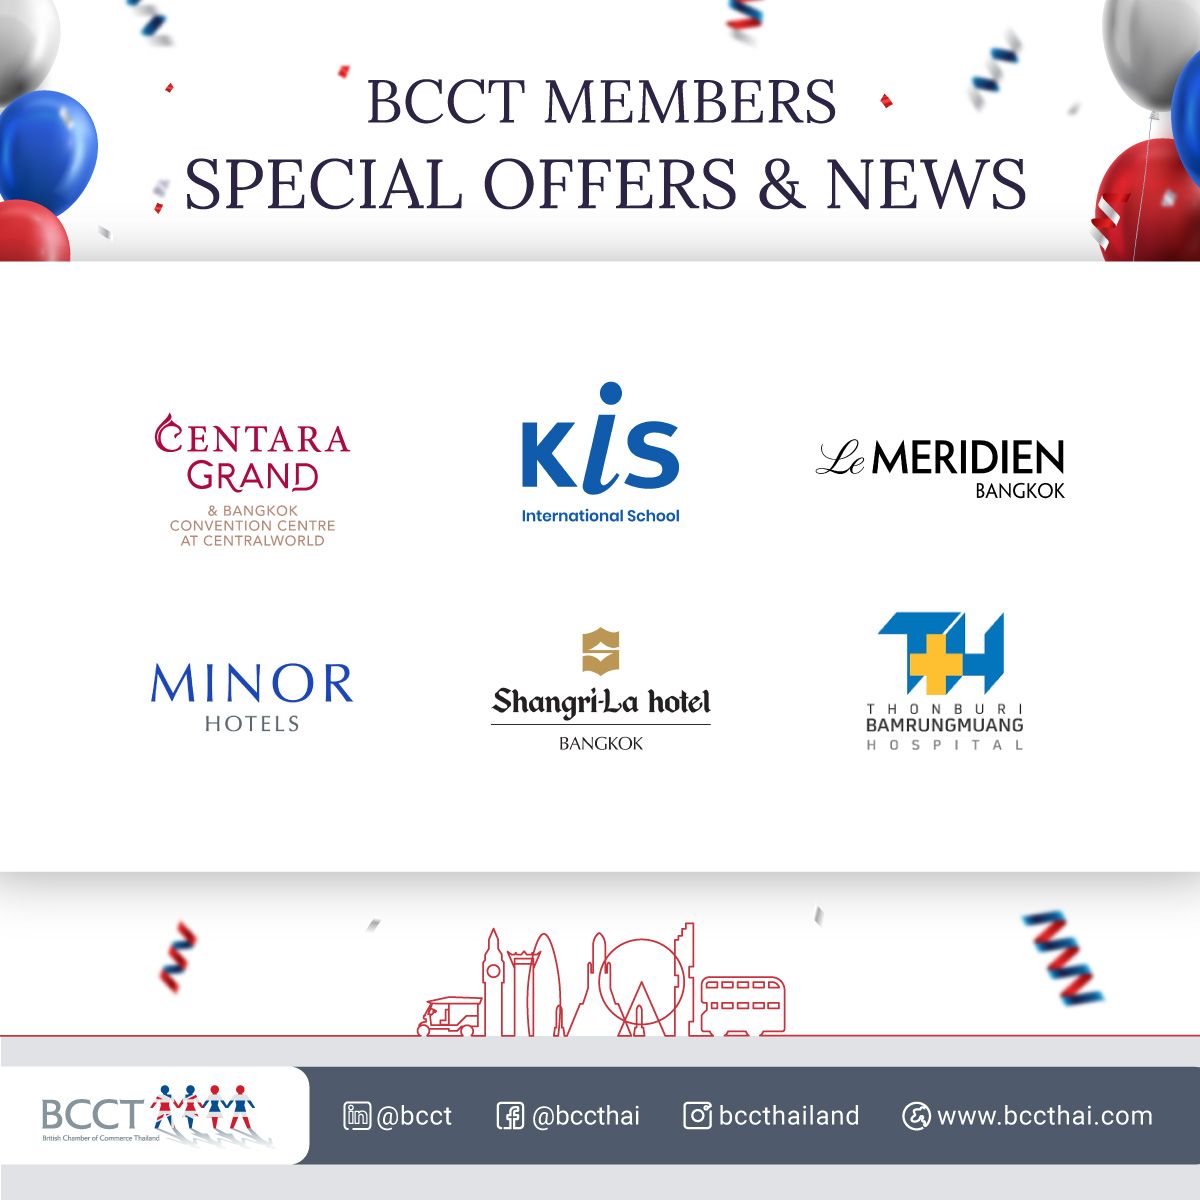 Discover new delicacies, great deals on health and wellness, and exclusive hotels, while catching up with the latest news and offers – only available for BCCT members! see details at members.bccthai.com/bcct/asp/defau…